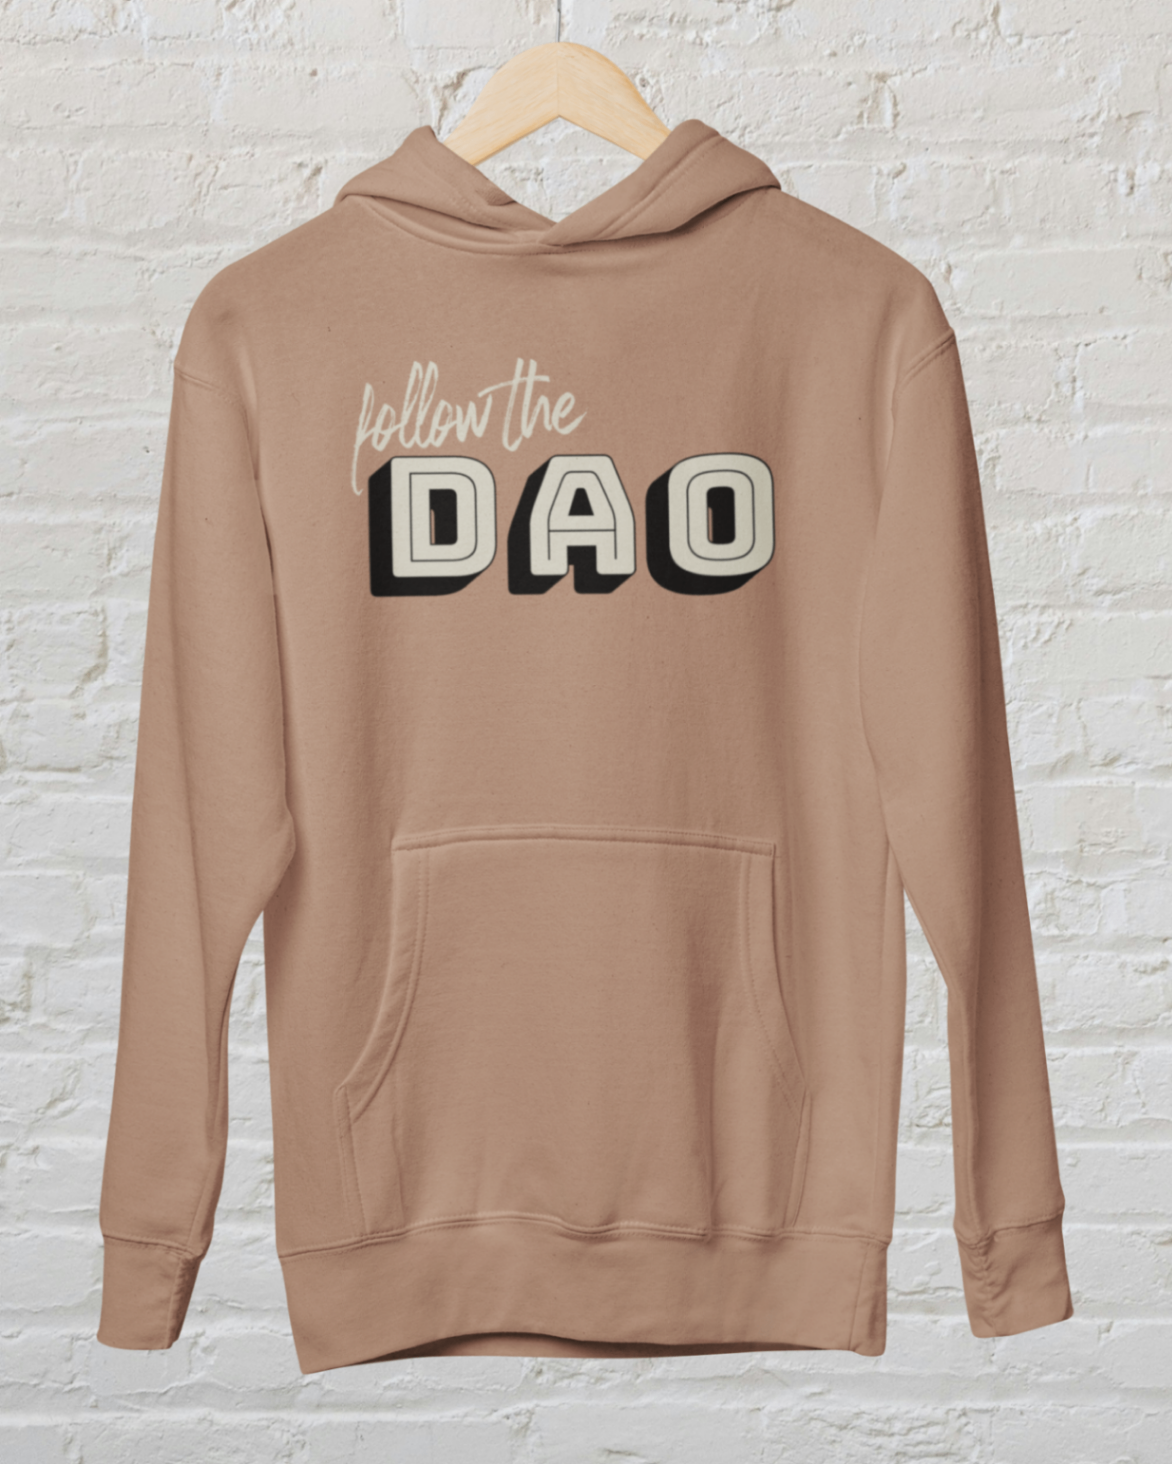  a caramel latte hoodie with follow the dao design over a white brick backround